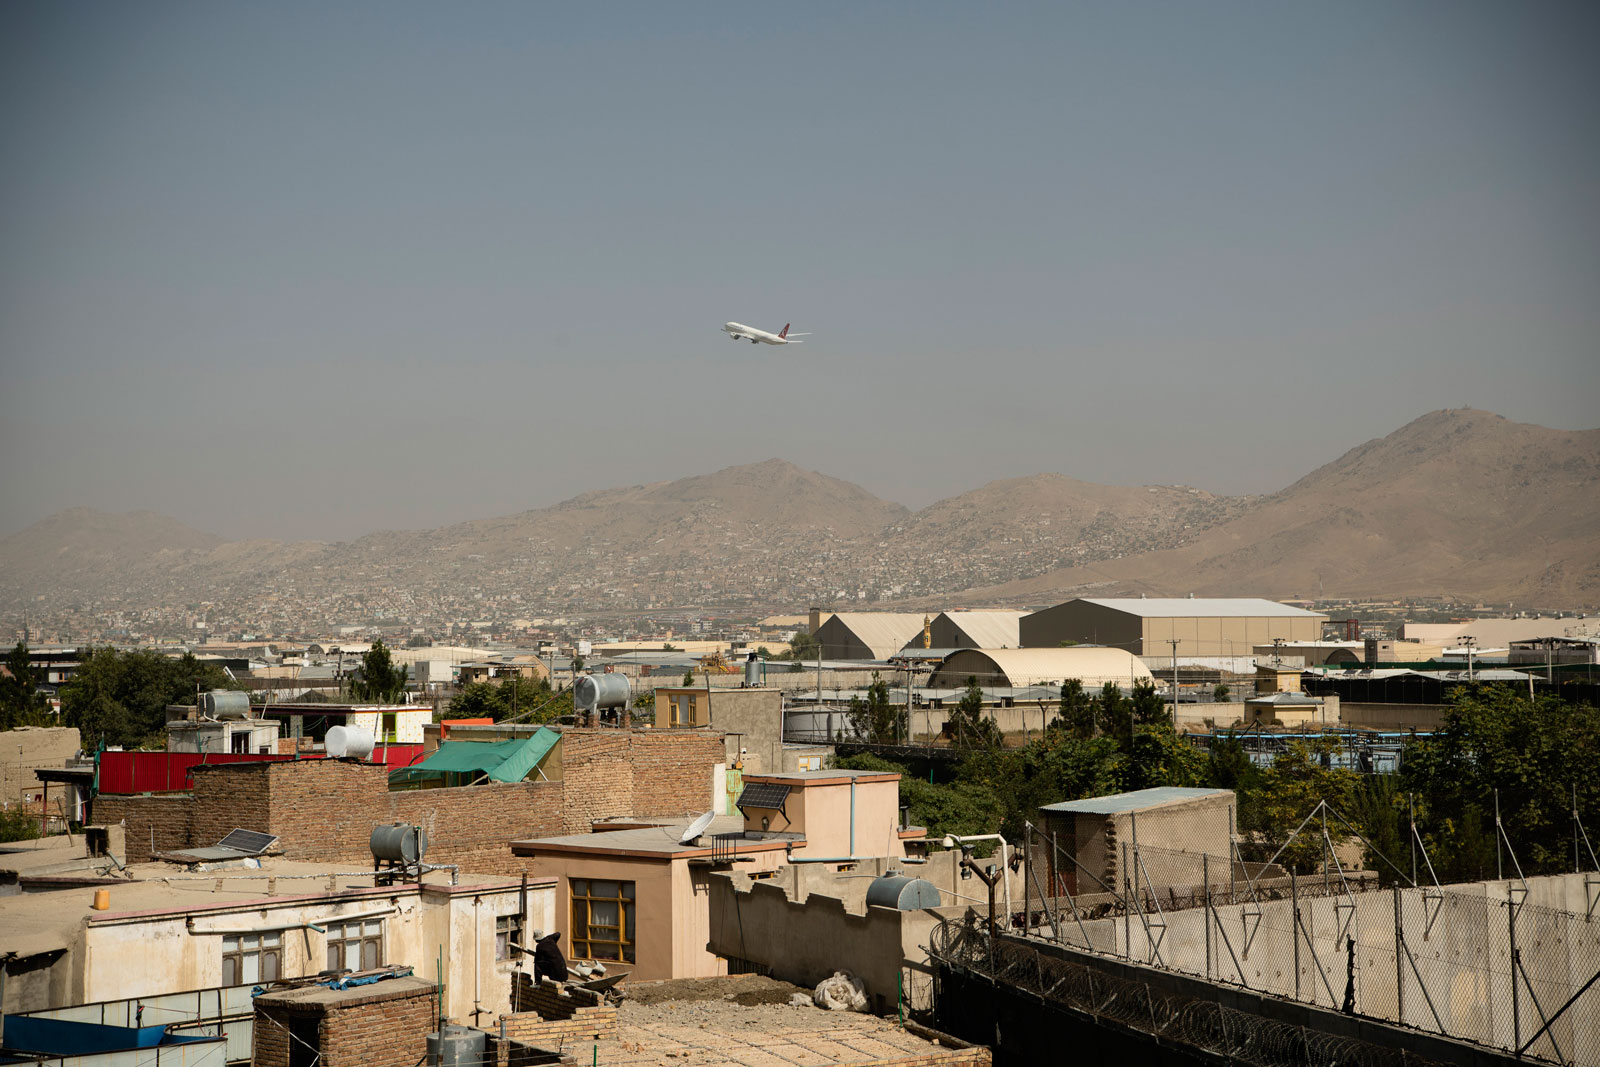 A plane leaves the Hamid Karzai International Airport in Kabul, Afghanistan, before the Taliban's takeover of the country's capital on August 15.